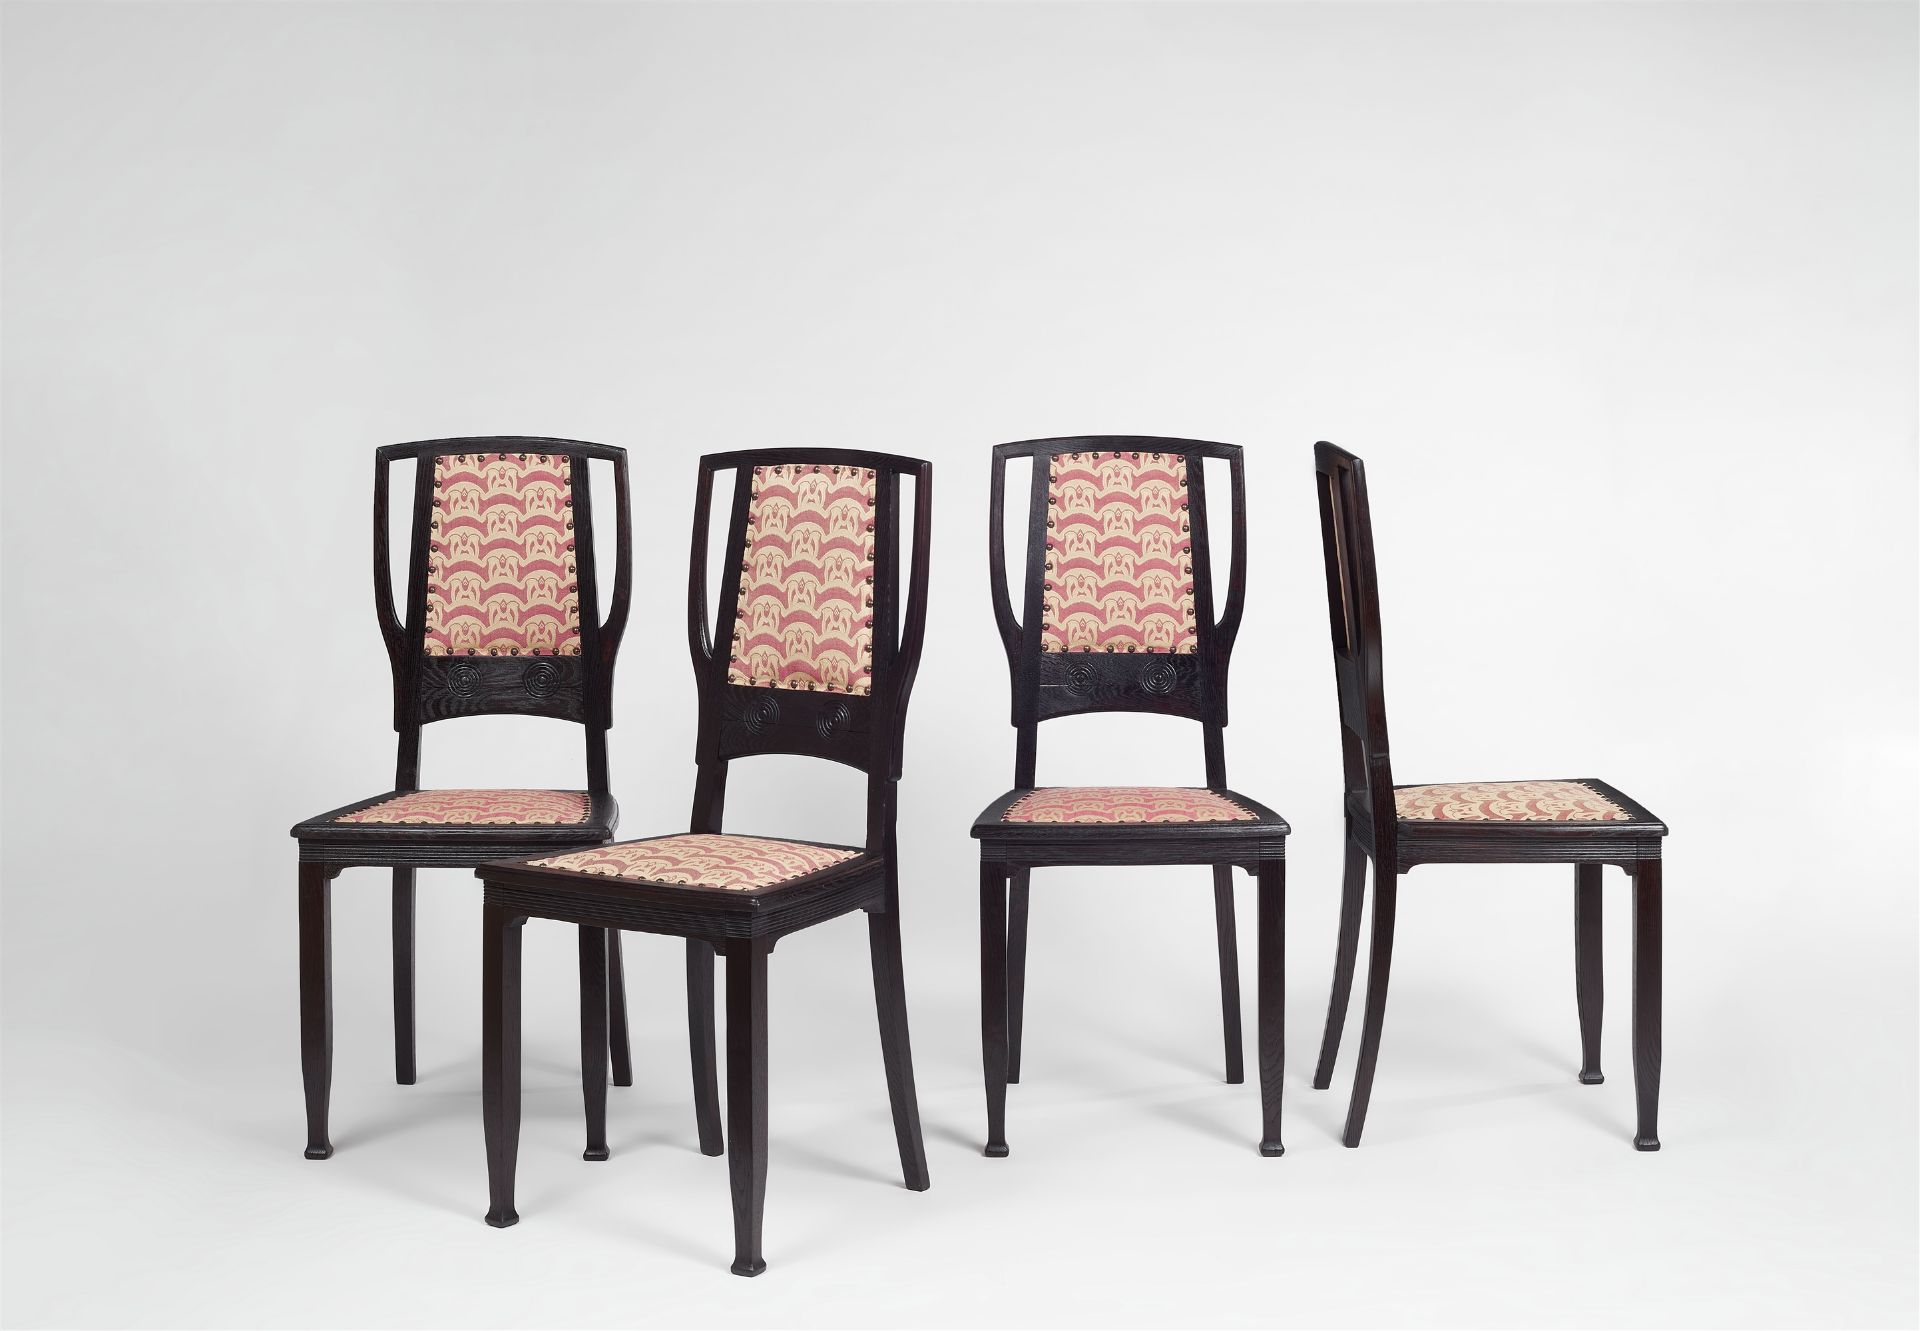 Four dining chairs , Attributed to Henry van de Velde